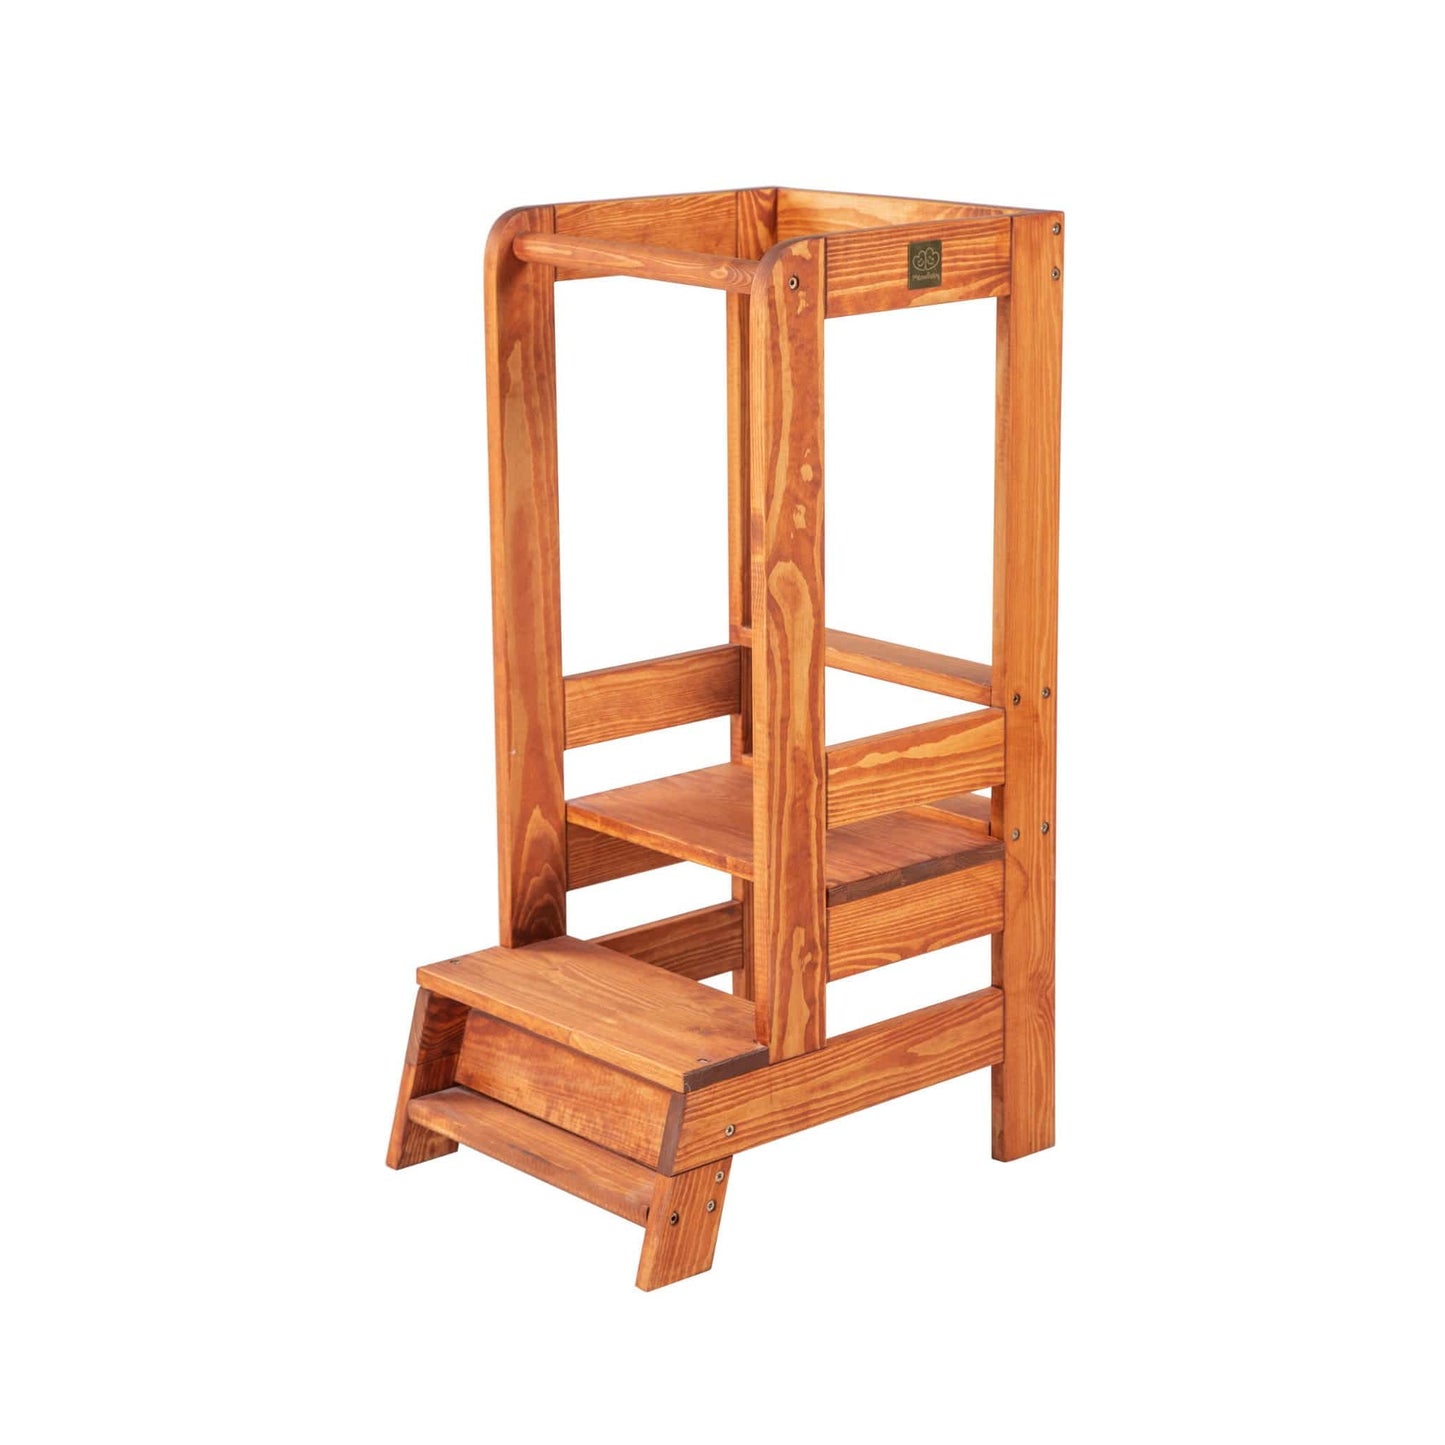 Wooden Kitchen Helper By MeowBaby - Learning Tower For Kids - Stylemykid.com